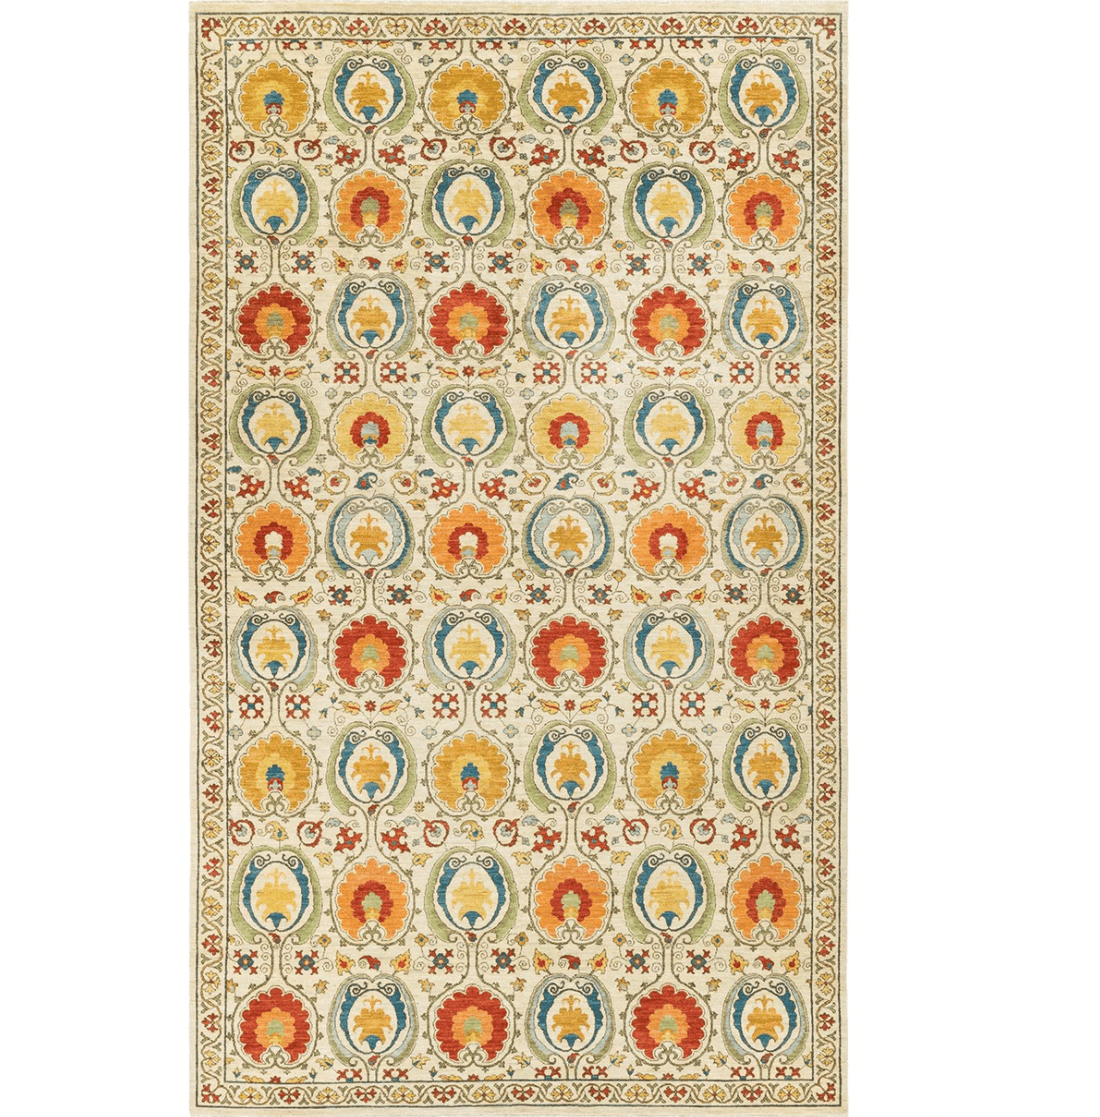 Ruby Adornment Hand Spun Wool Hand Knotted Area Rug - MAIA HOMES